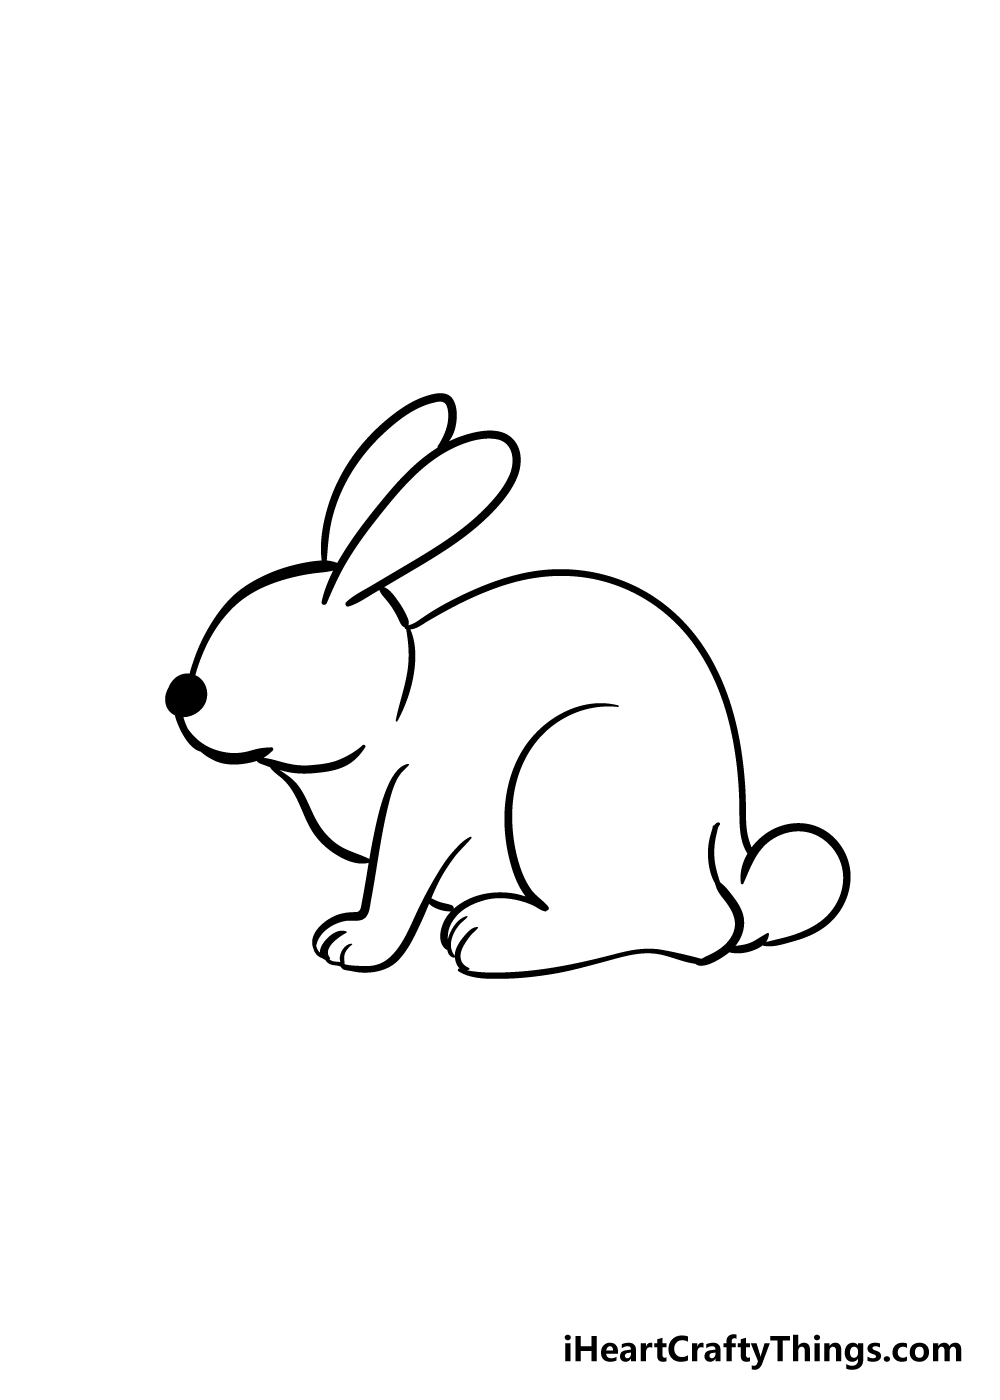 40319 Line Drawings Rabbits Images Stock Photos  Vectors  Shutterstock